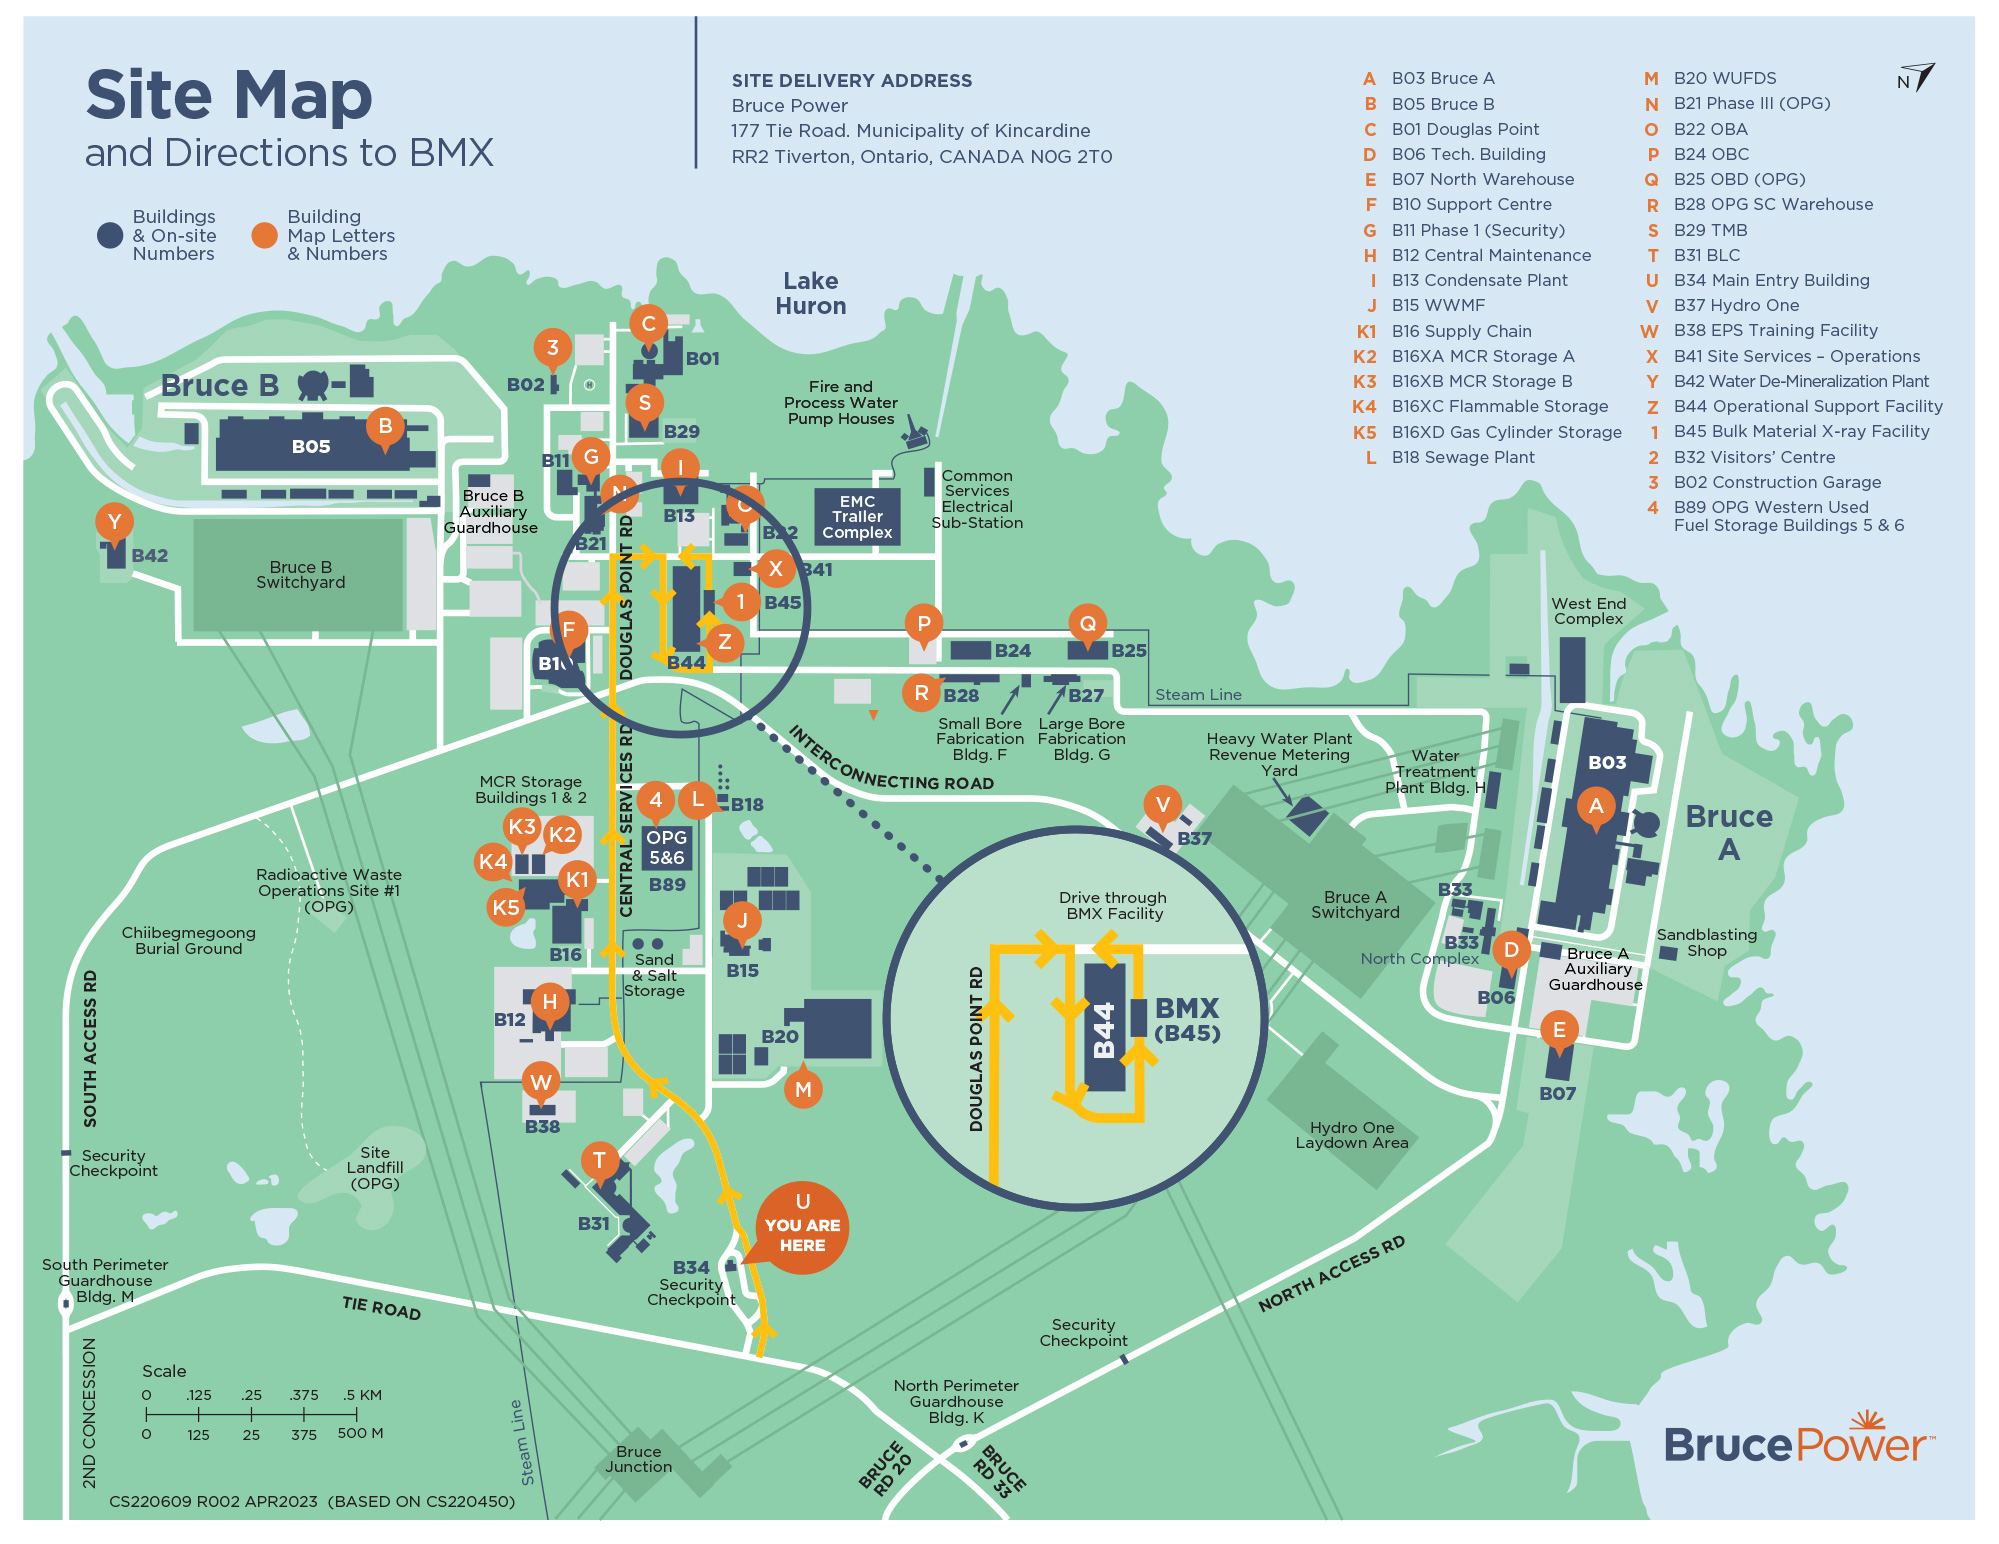 A site map with driving route to the BMX building.